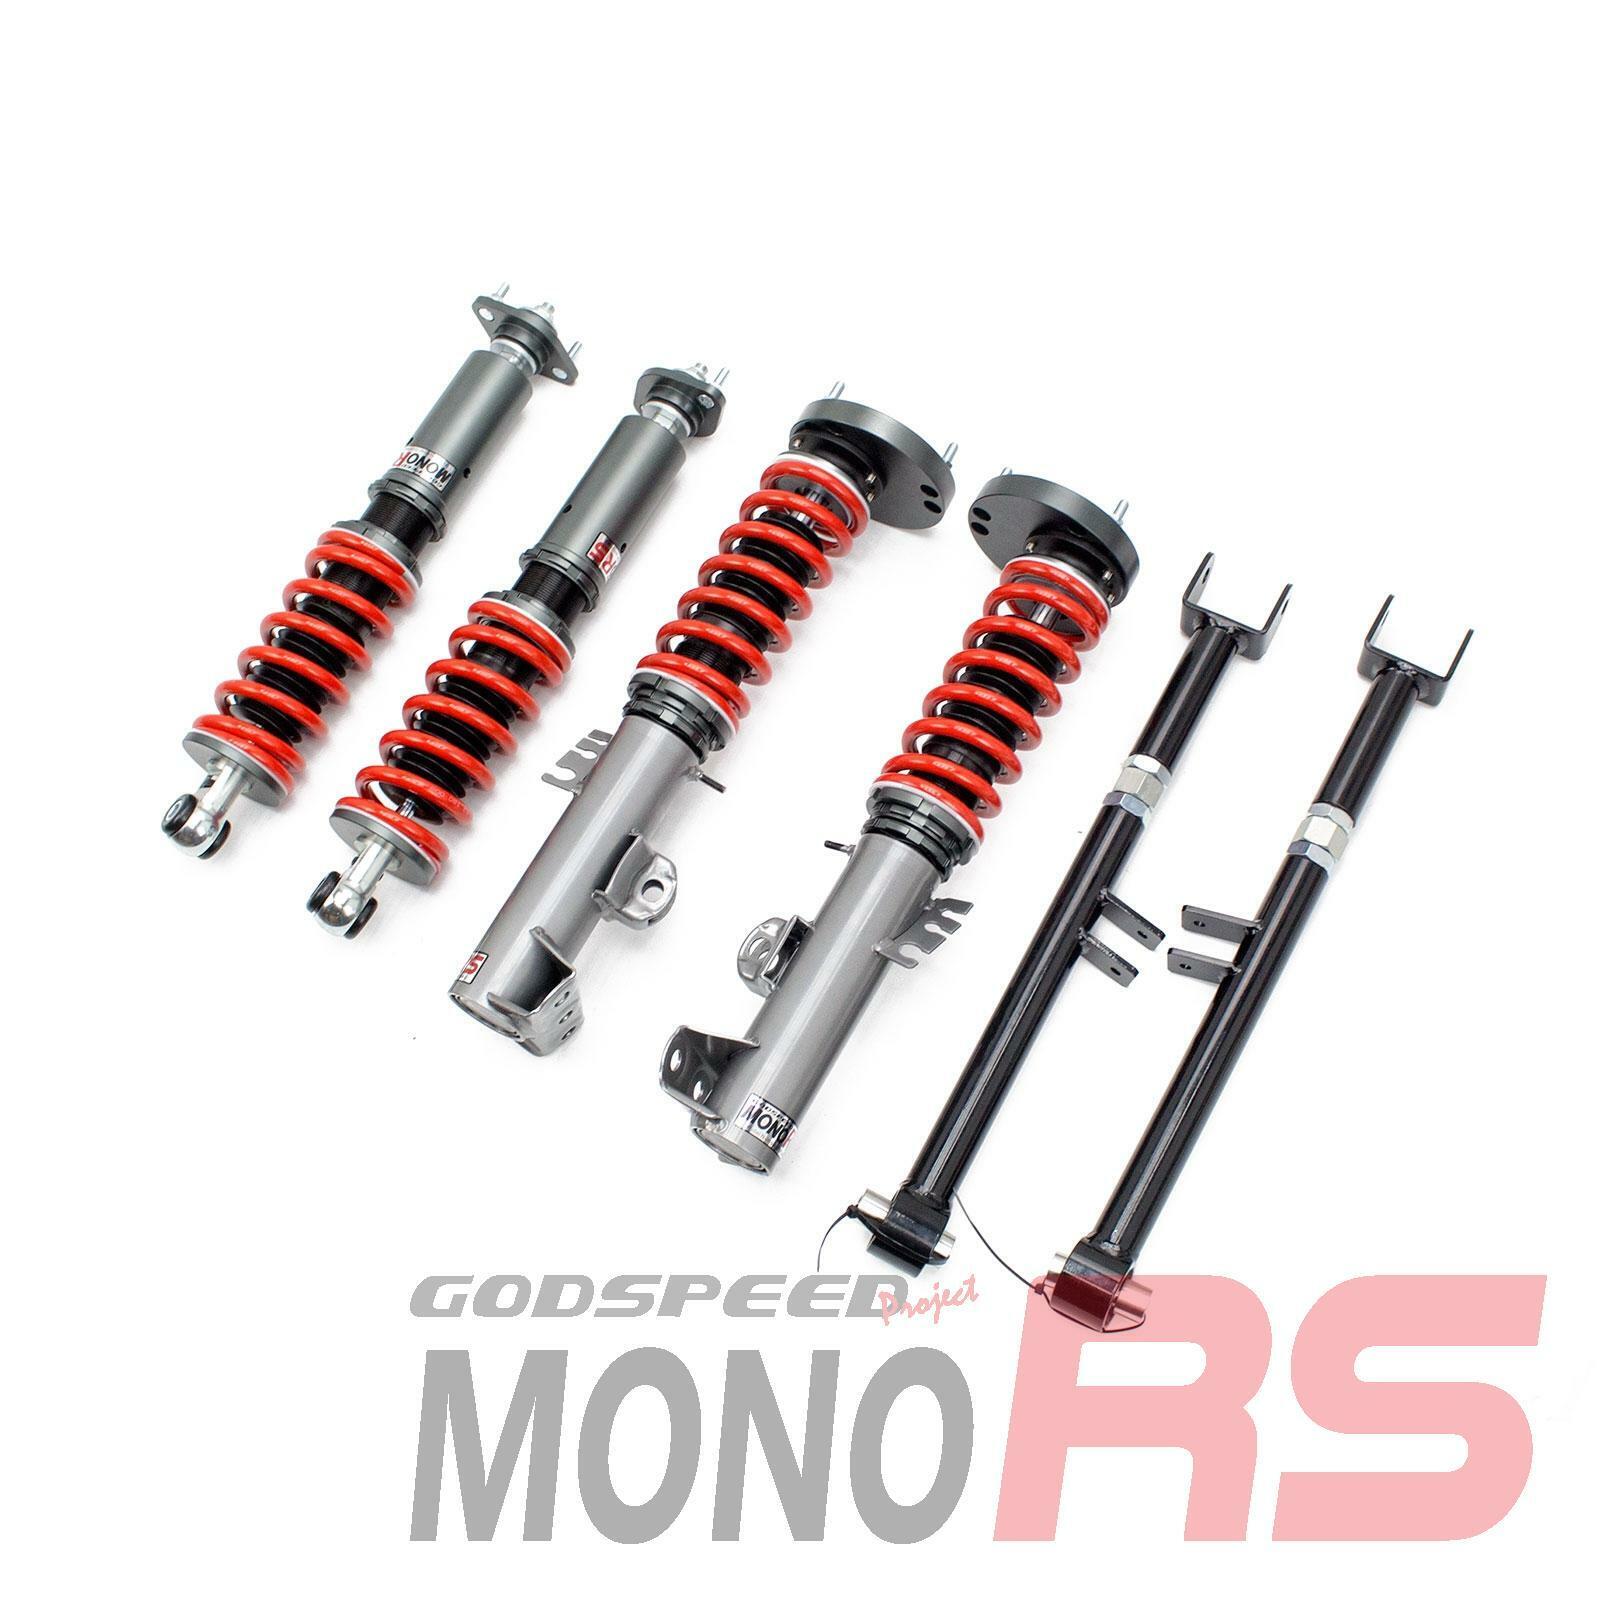 Godspeed MRS1418 MonoRS Coilover Lowering Kit 32 Clicks True Coilovers Setup Arm